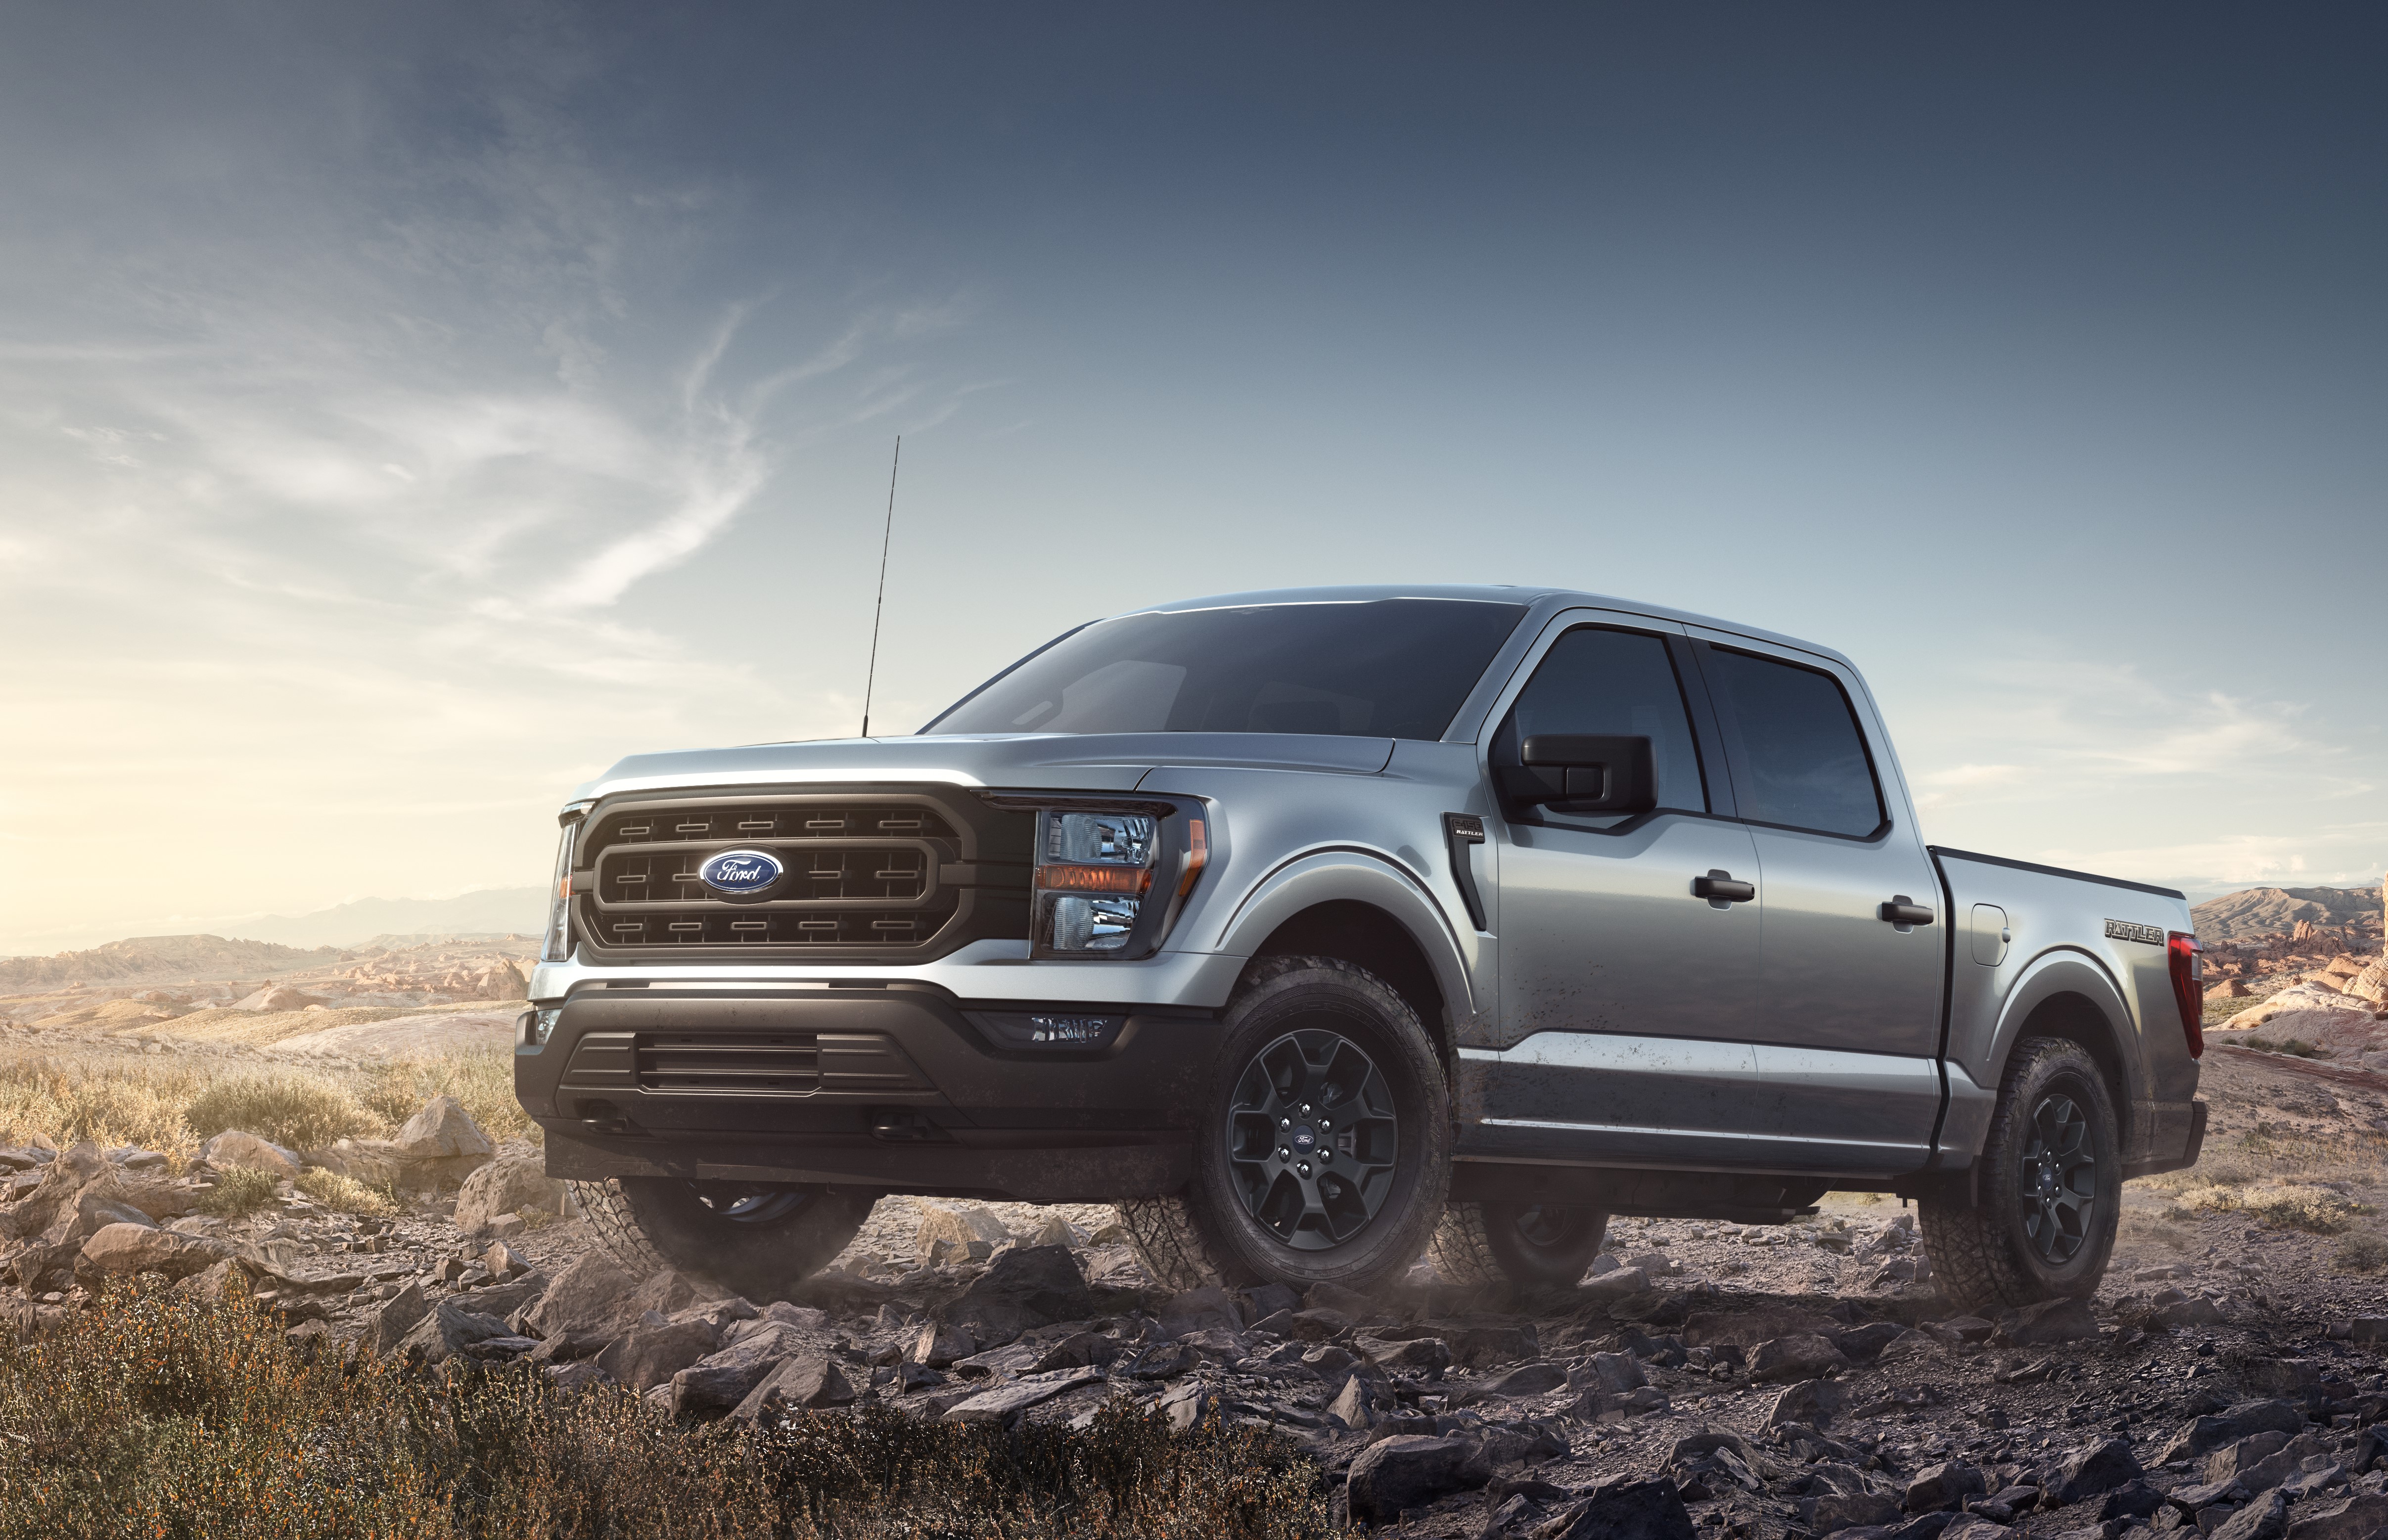 Ford’s F-150 Rattler: an Entry-Level Offroader